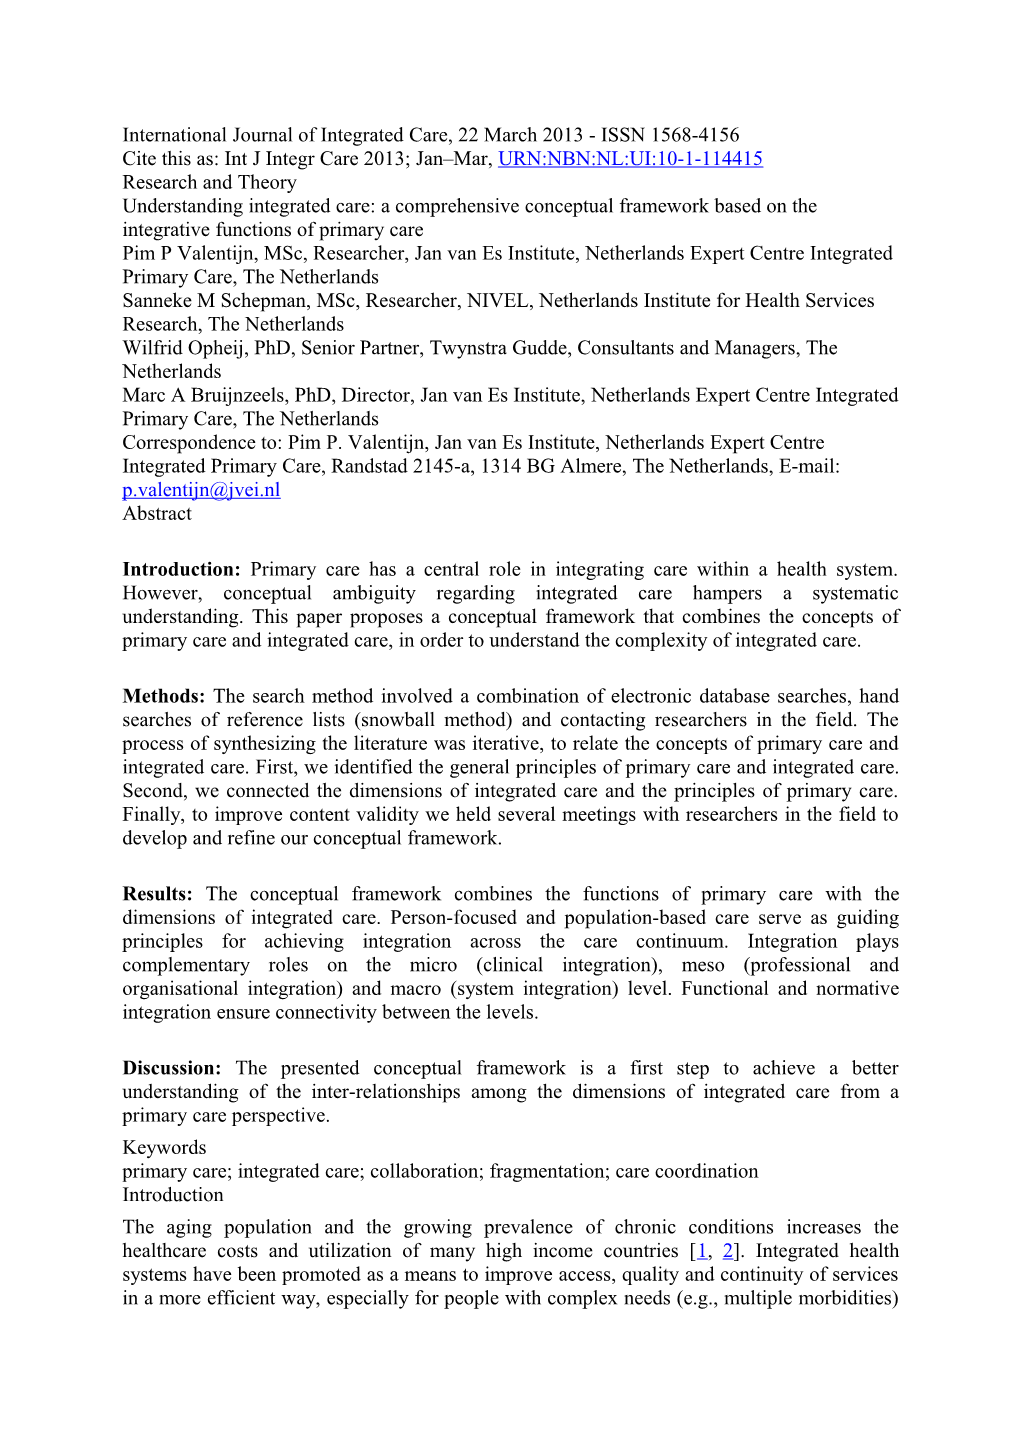 International Journal of Integrated Care, 22 March 2013 - ISSN 1568-4156